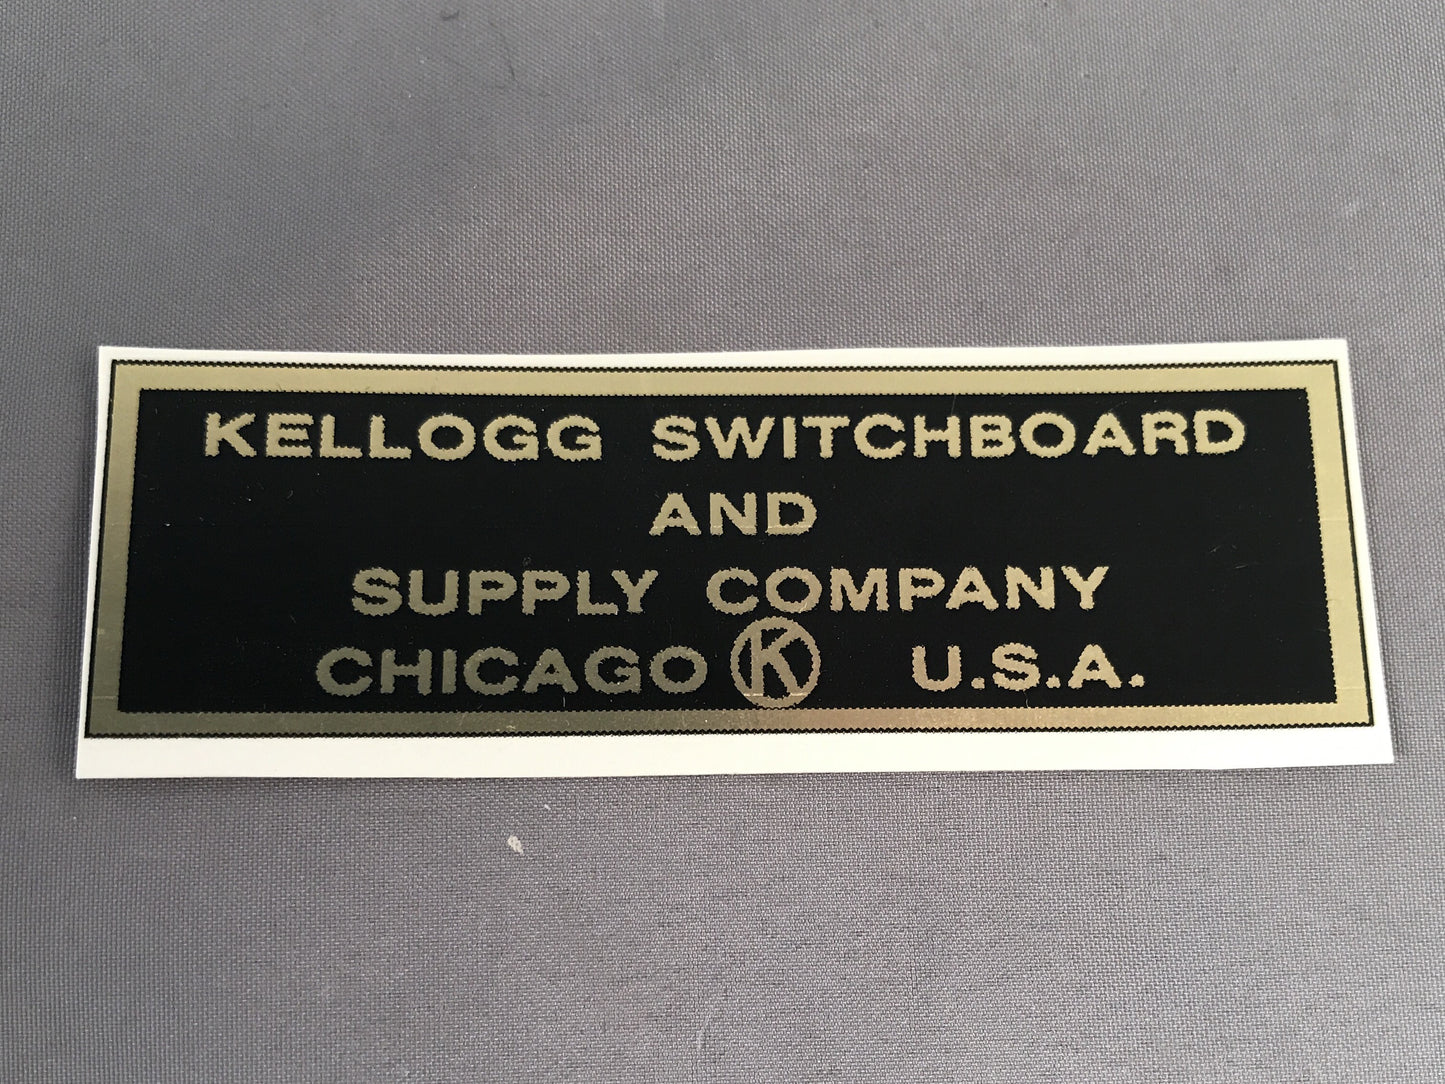 Kellogg Switchboard and Supply Company Water Decal - Black